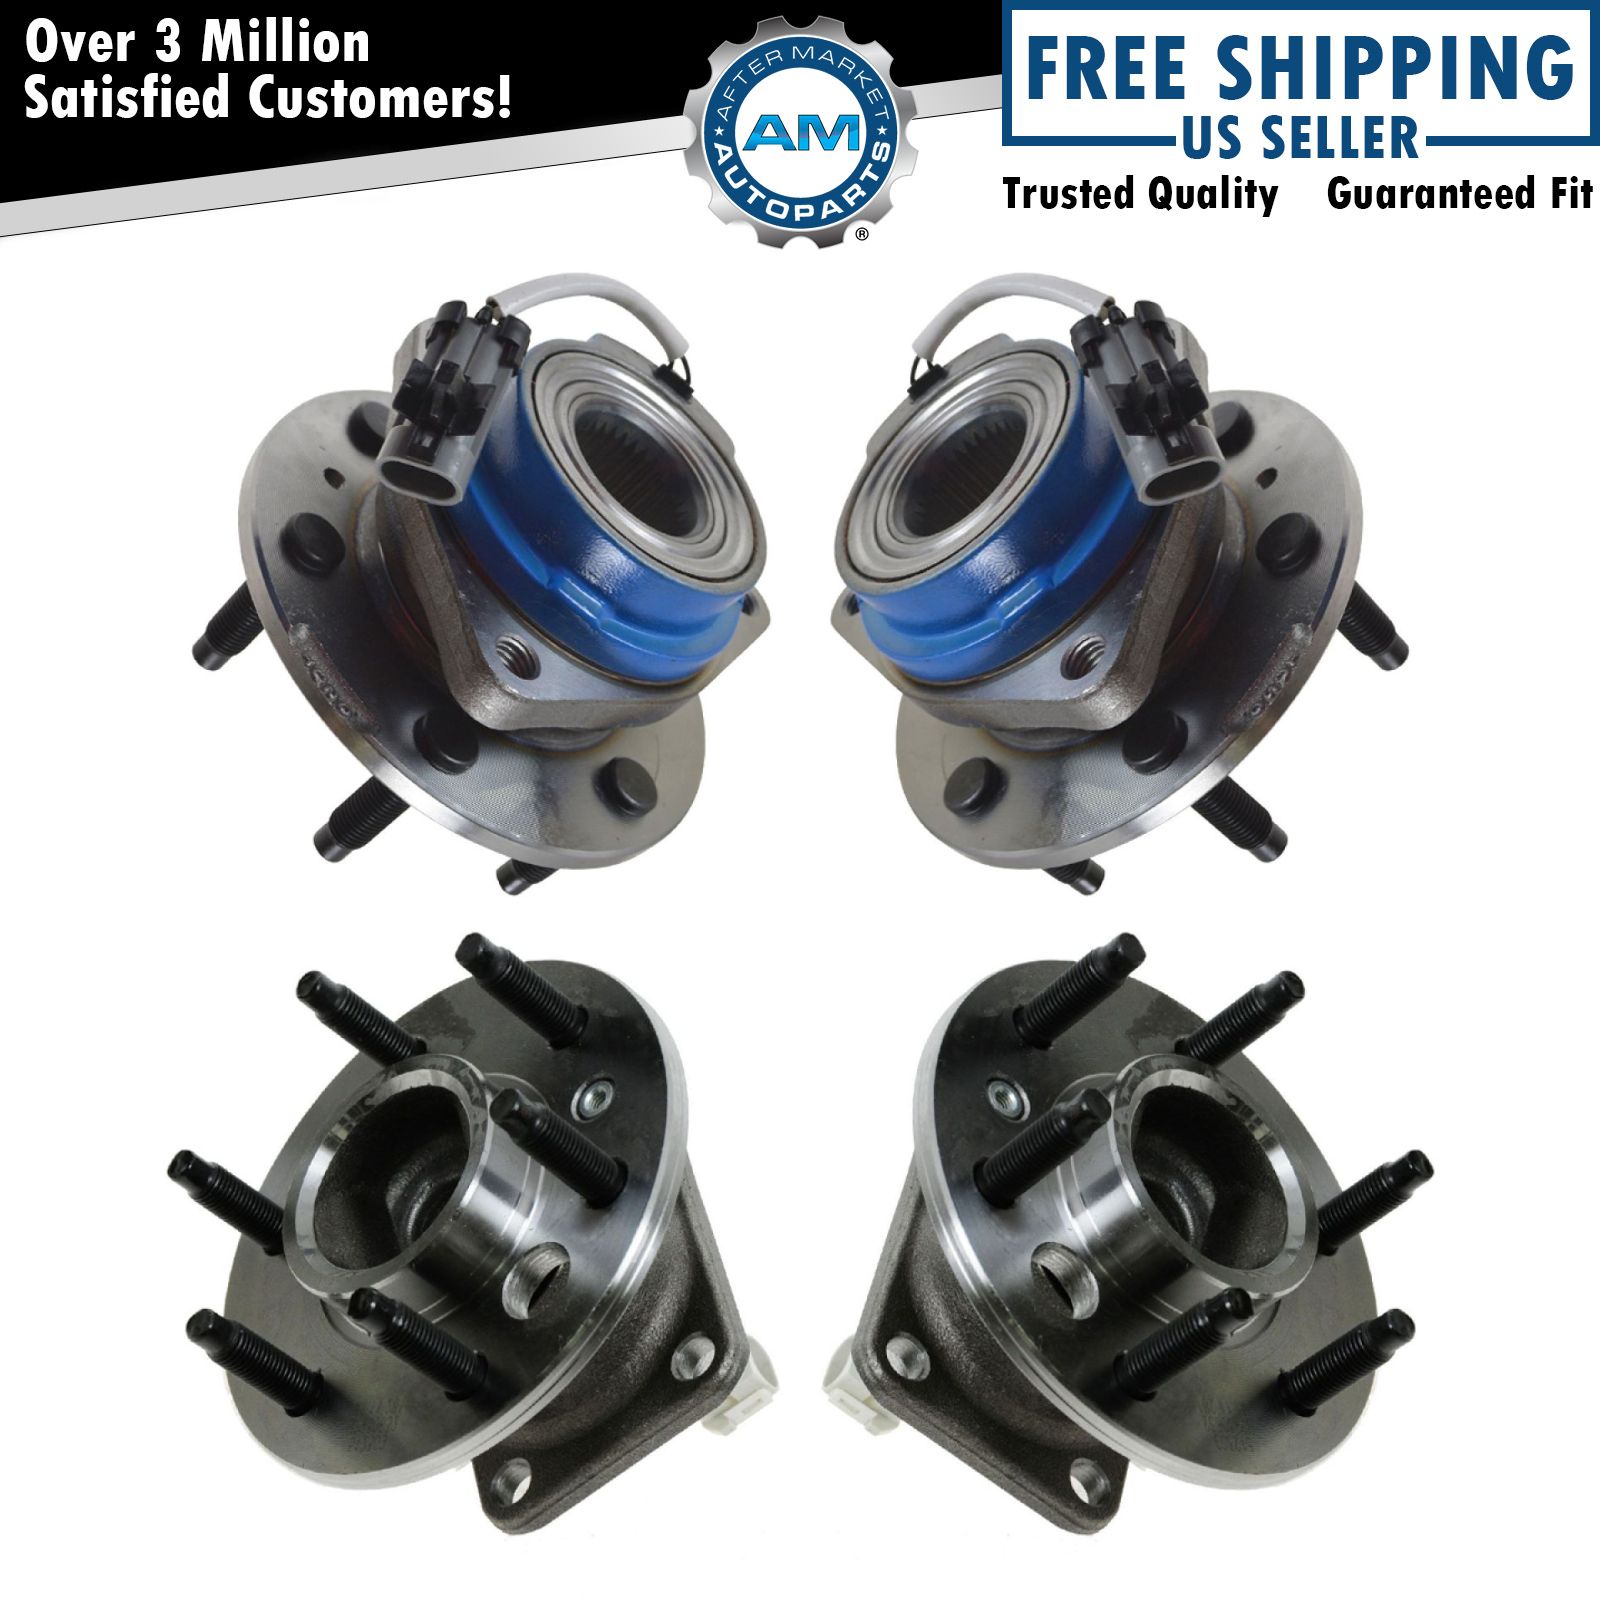 4 Piece Front Rear Wheel Hub & Bearing Assemblies for Chevy Buick Pontiac New